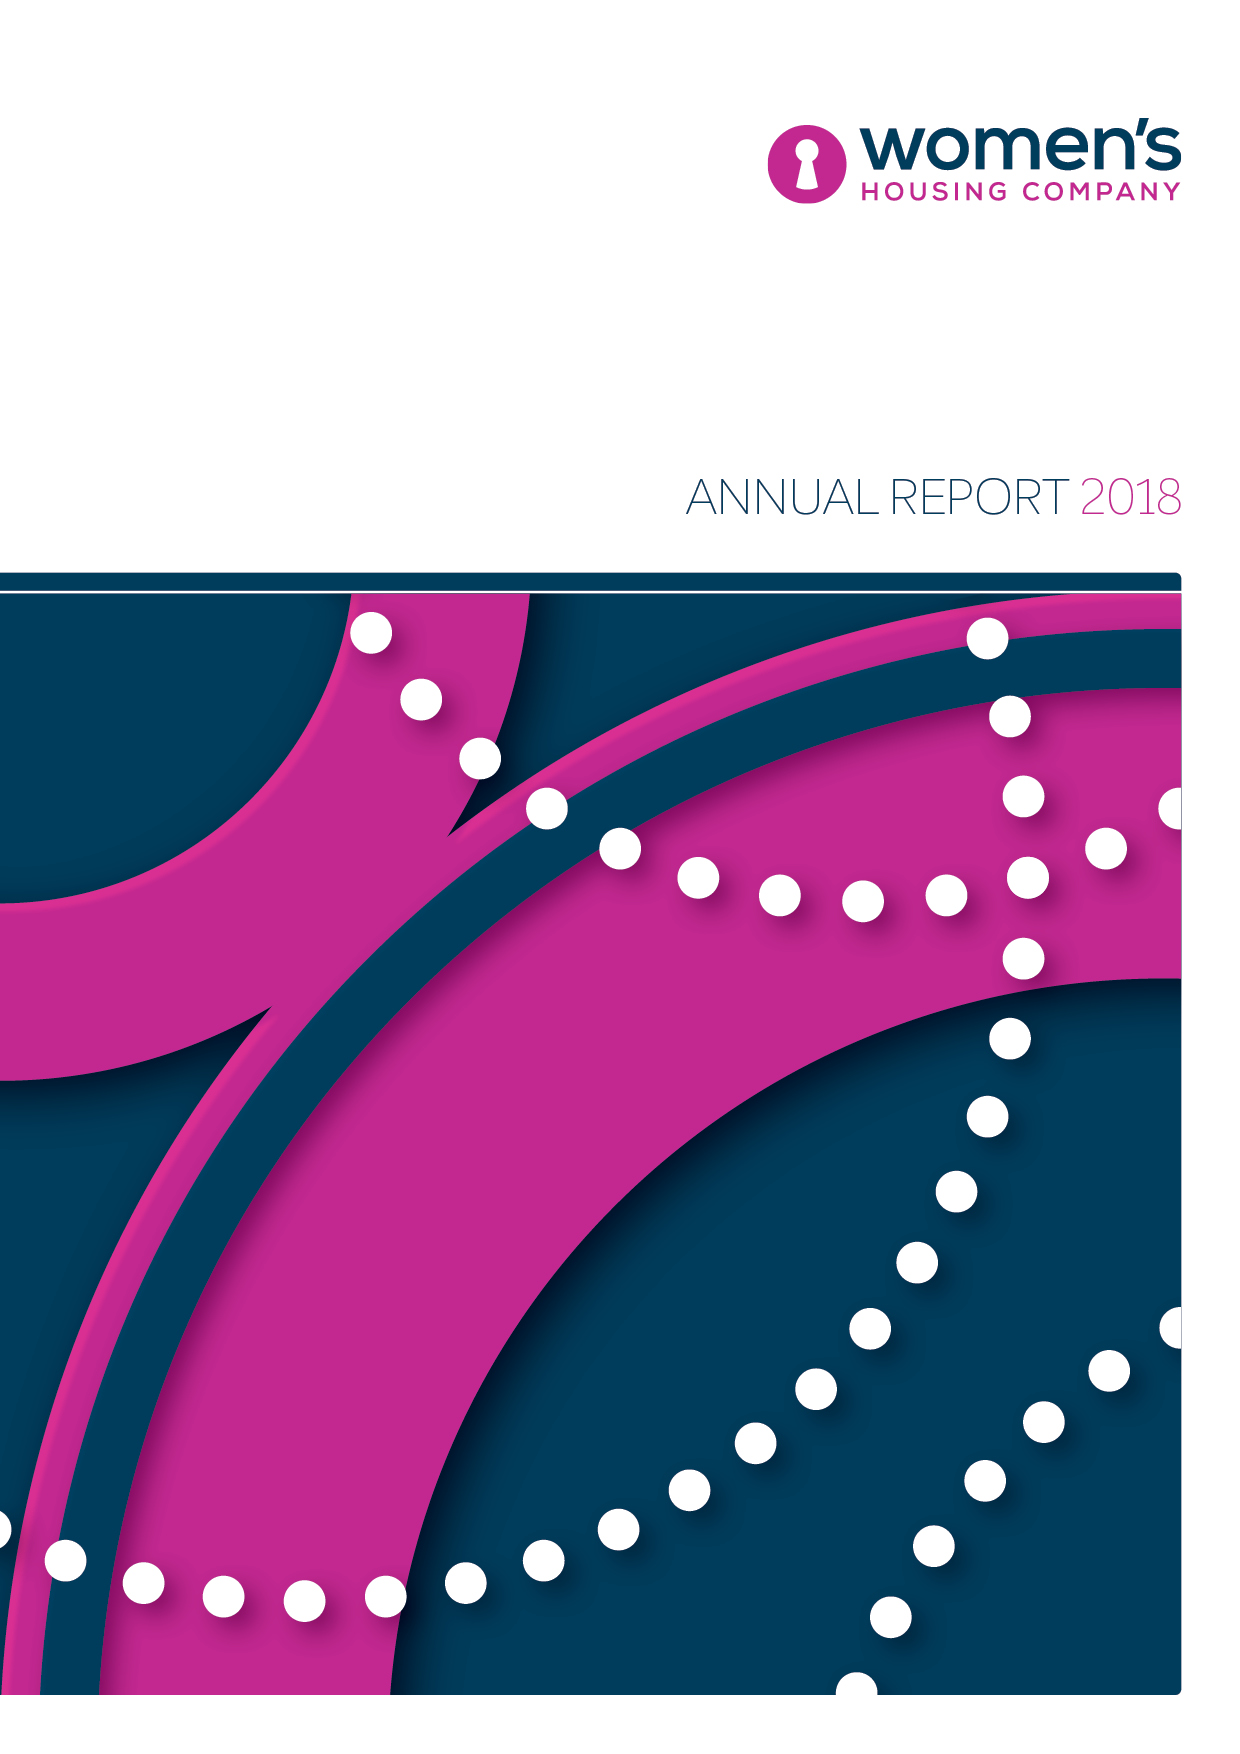 Women's Housing Company Annual Report 2018 Cover